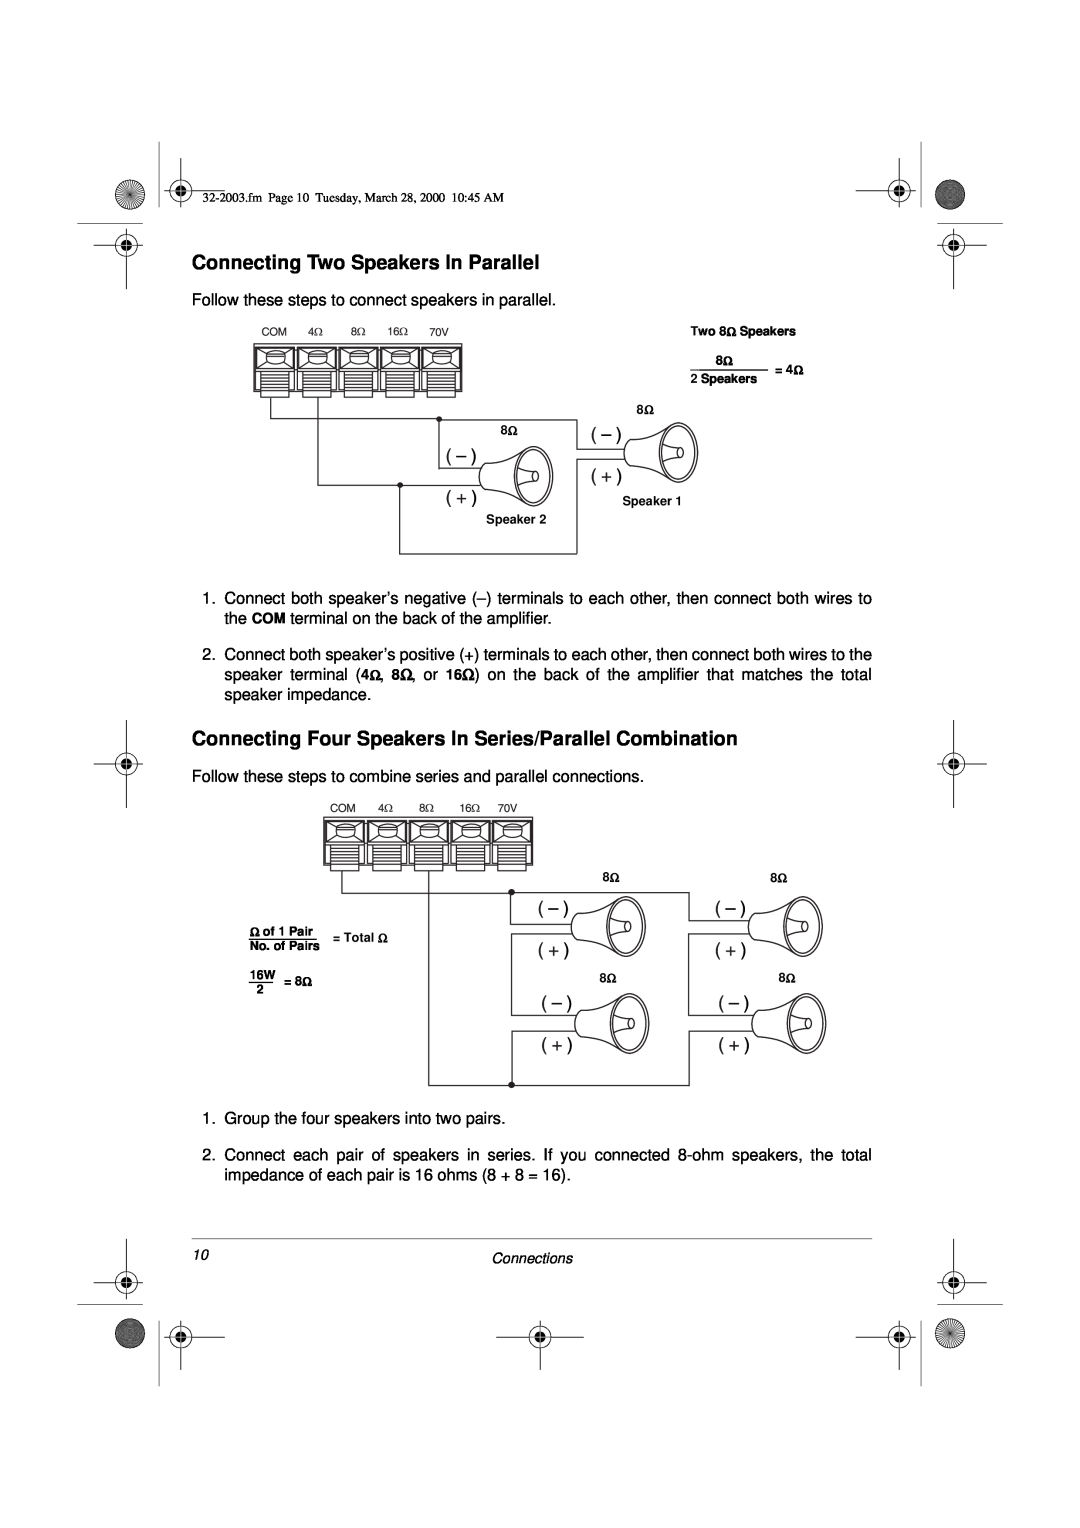 Radio Shack MPA-125 owner manual Connecting Two Speakers In Parallel 